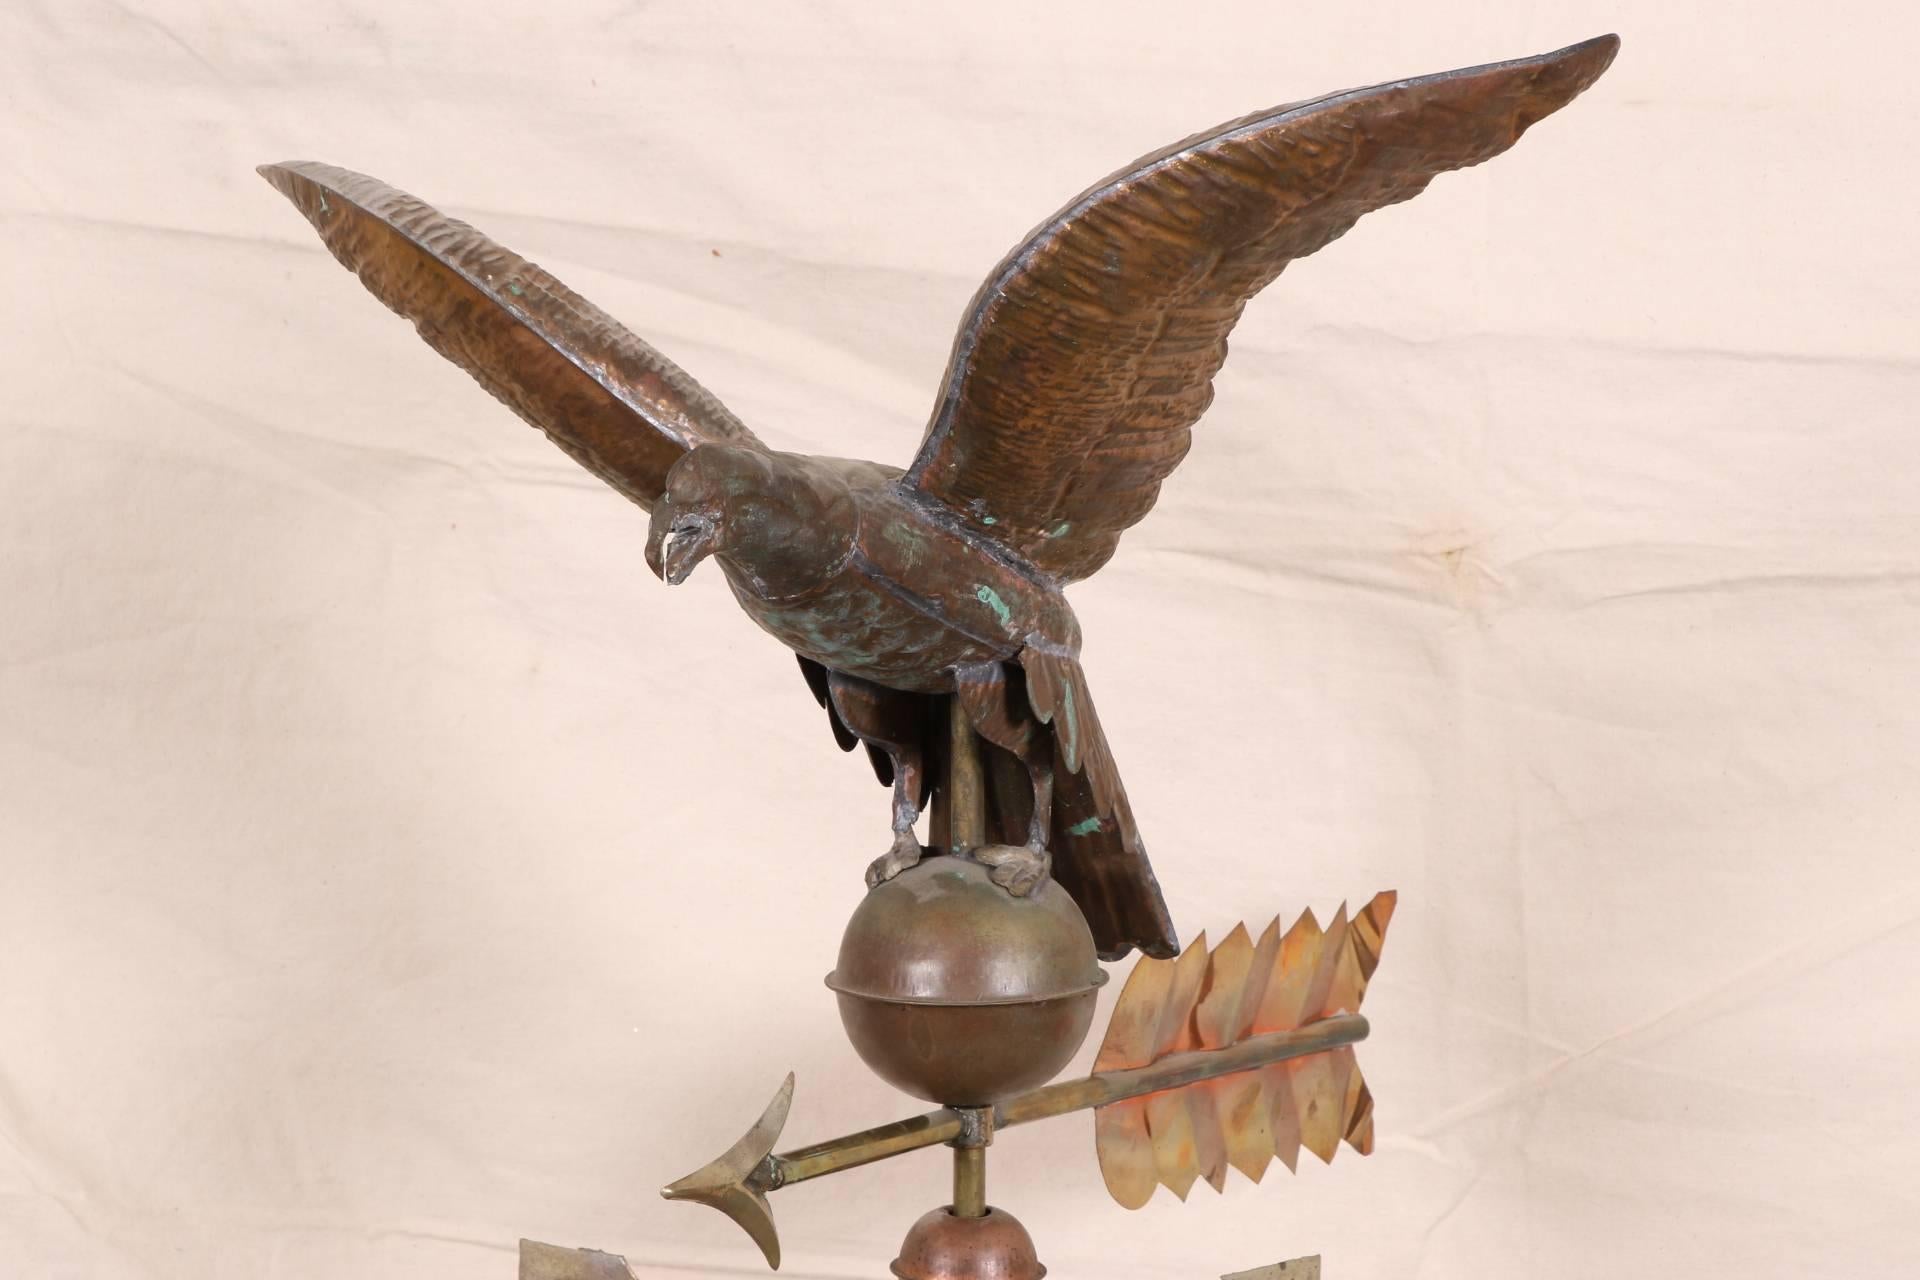 The copper eagle alighting on a sphere on top of a copper and brass arrow, above the cardinal points in gilt paint. Raised on a black painted and mounted on a wooden X-form base.
Condition: Tarnish to the eagle and sphere, wear to the gilt.